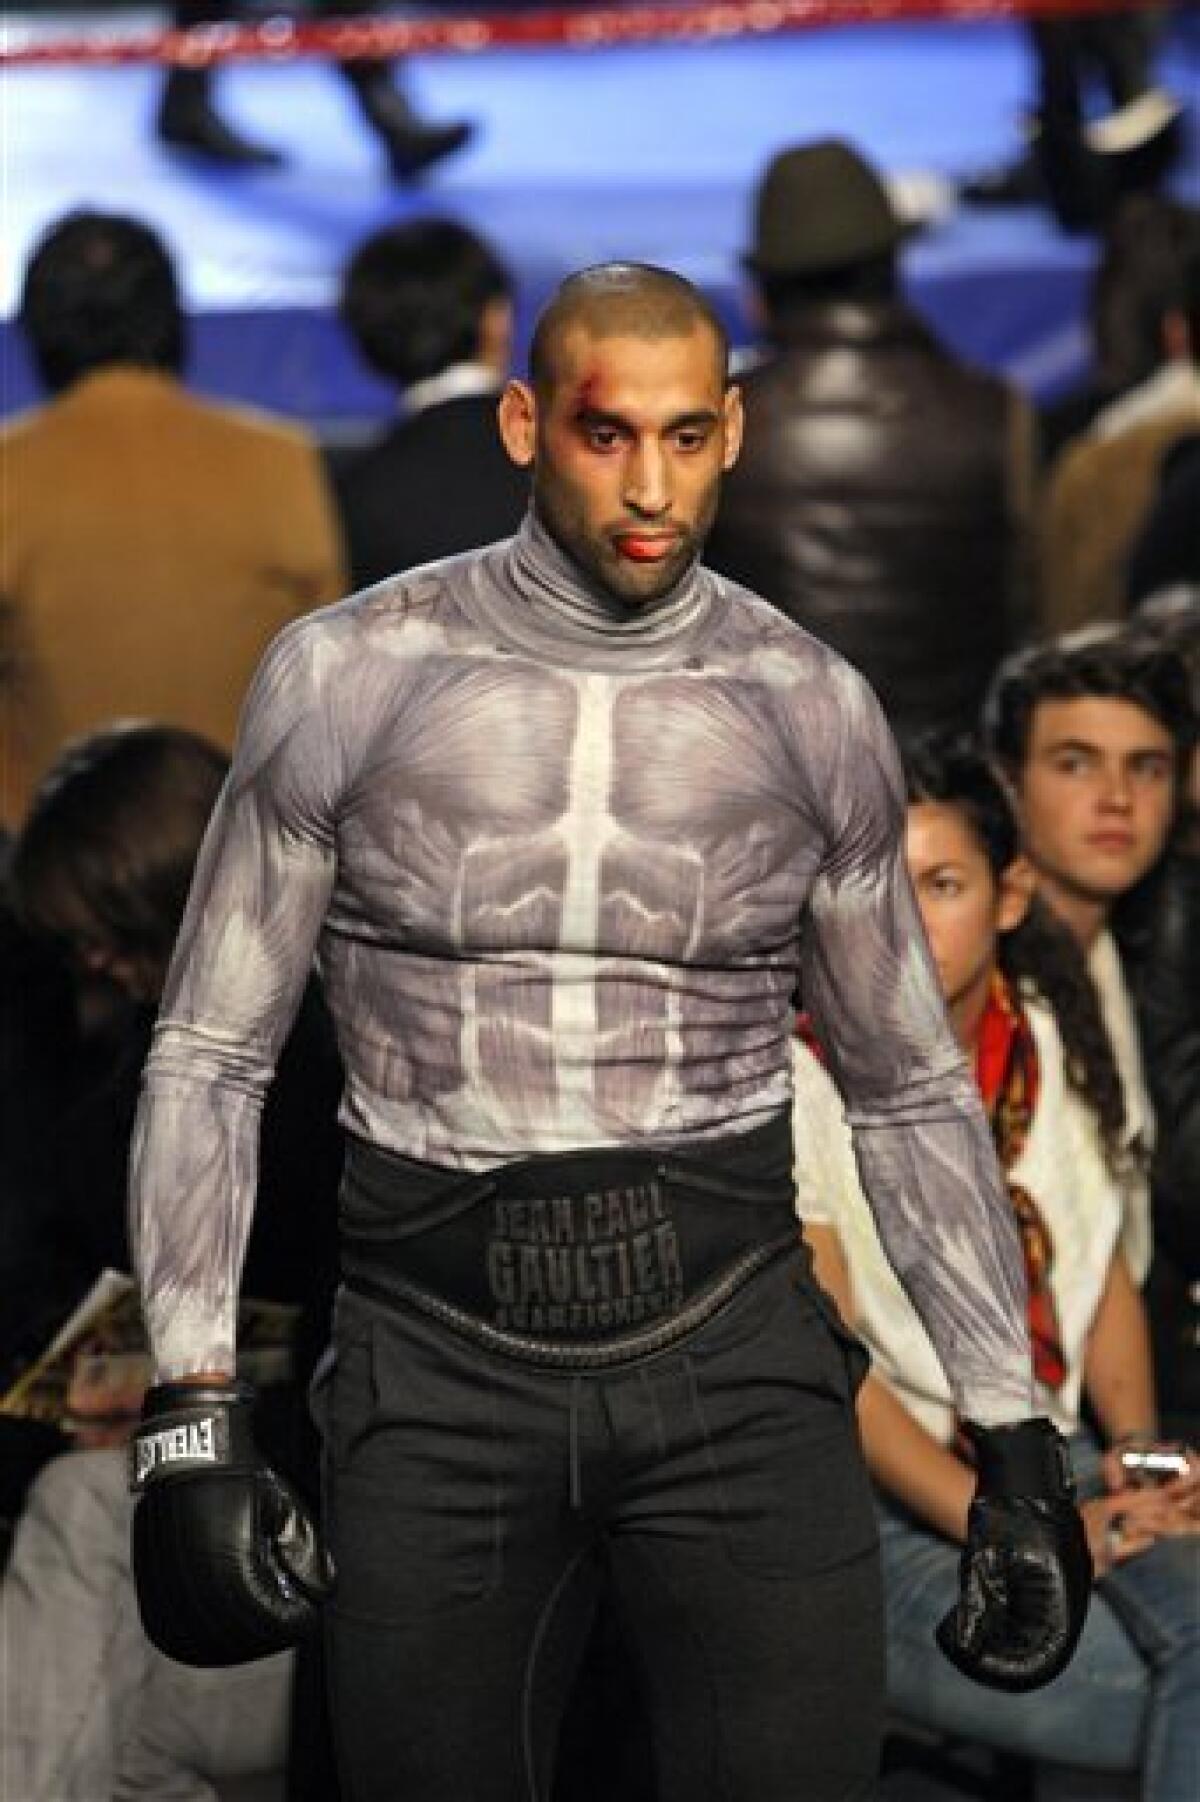 Knockout! Gaultier delivers boxing-inspired show - The San Diego